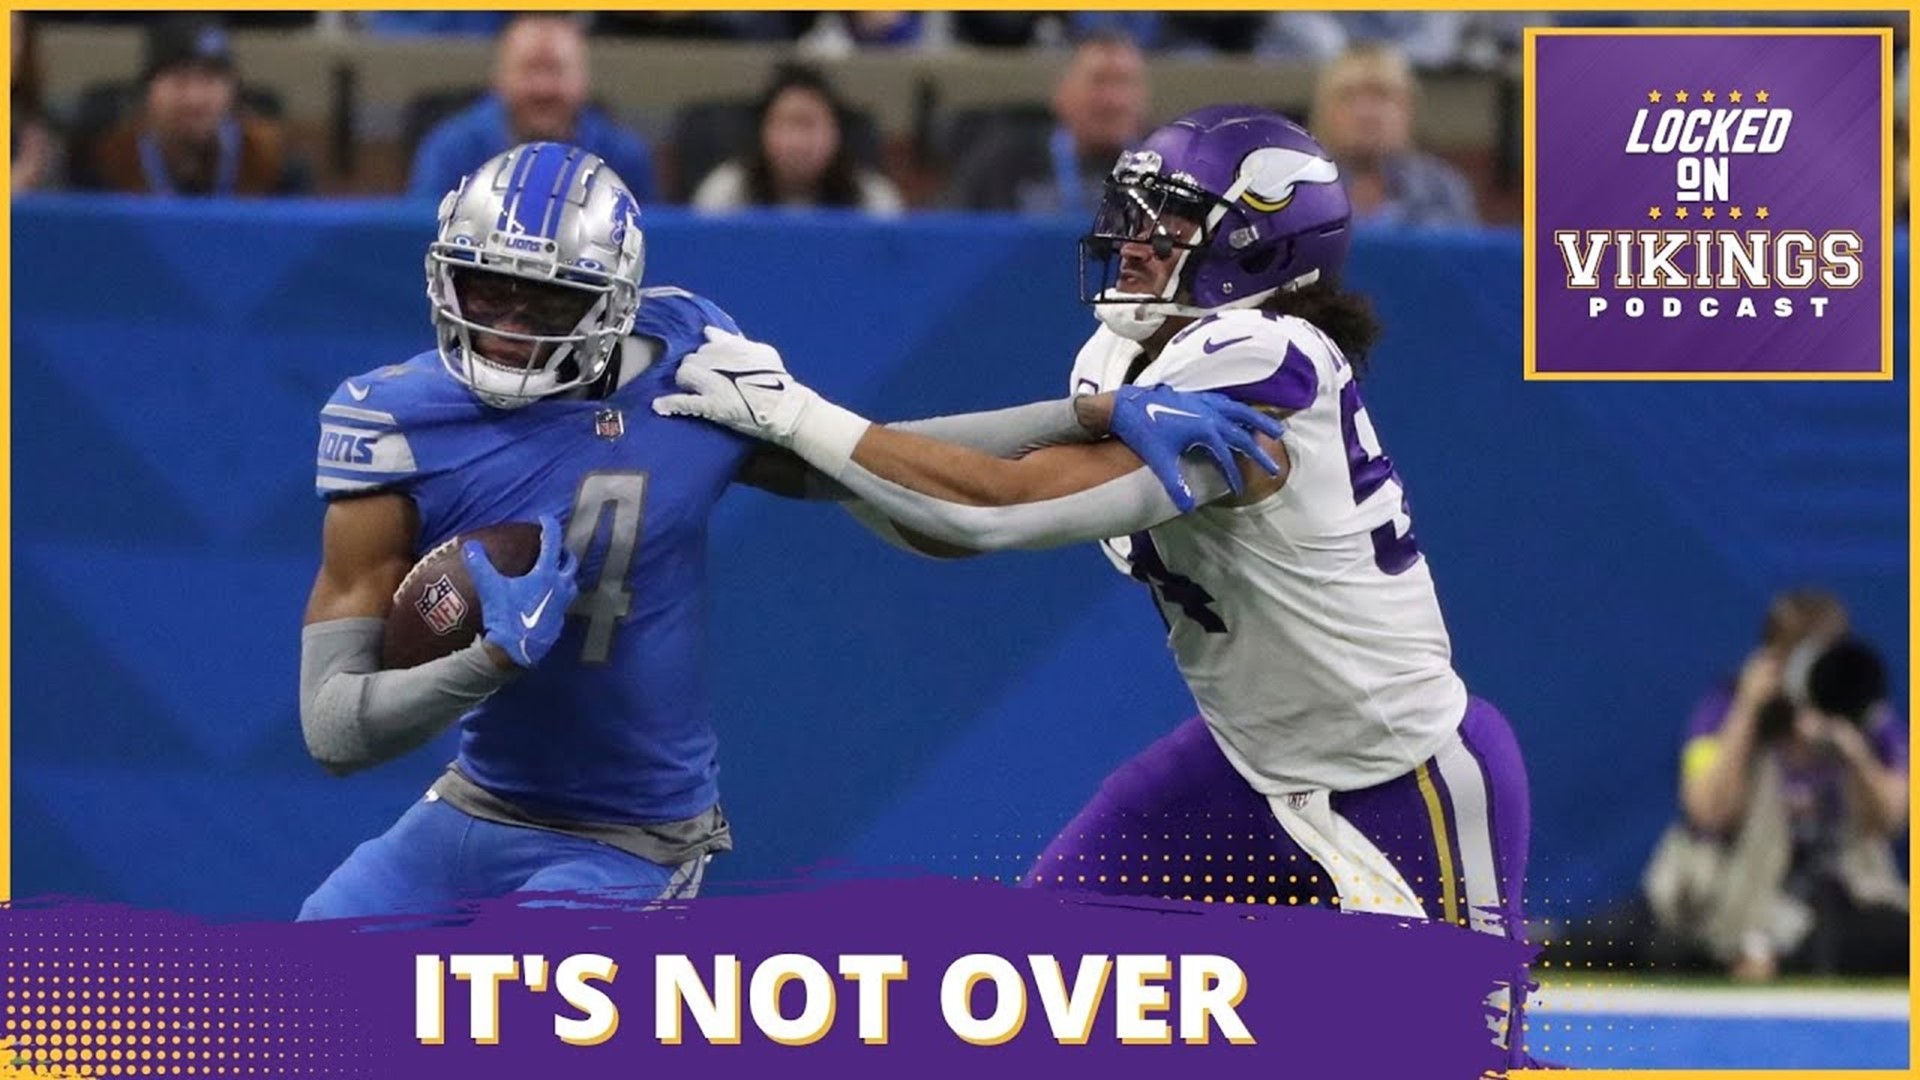 The Minnesota Vikings defense is at its rock bottom. Eric Kendricks looks lost. Danielle Hunter and Harrison Smith seemed to have their edges dulled. What's wrong?